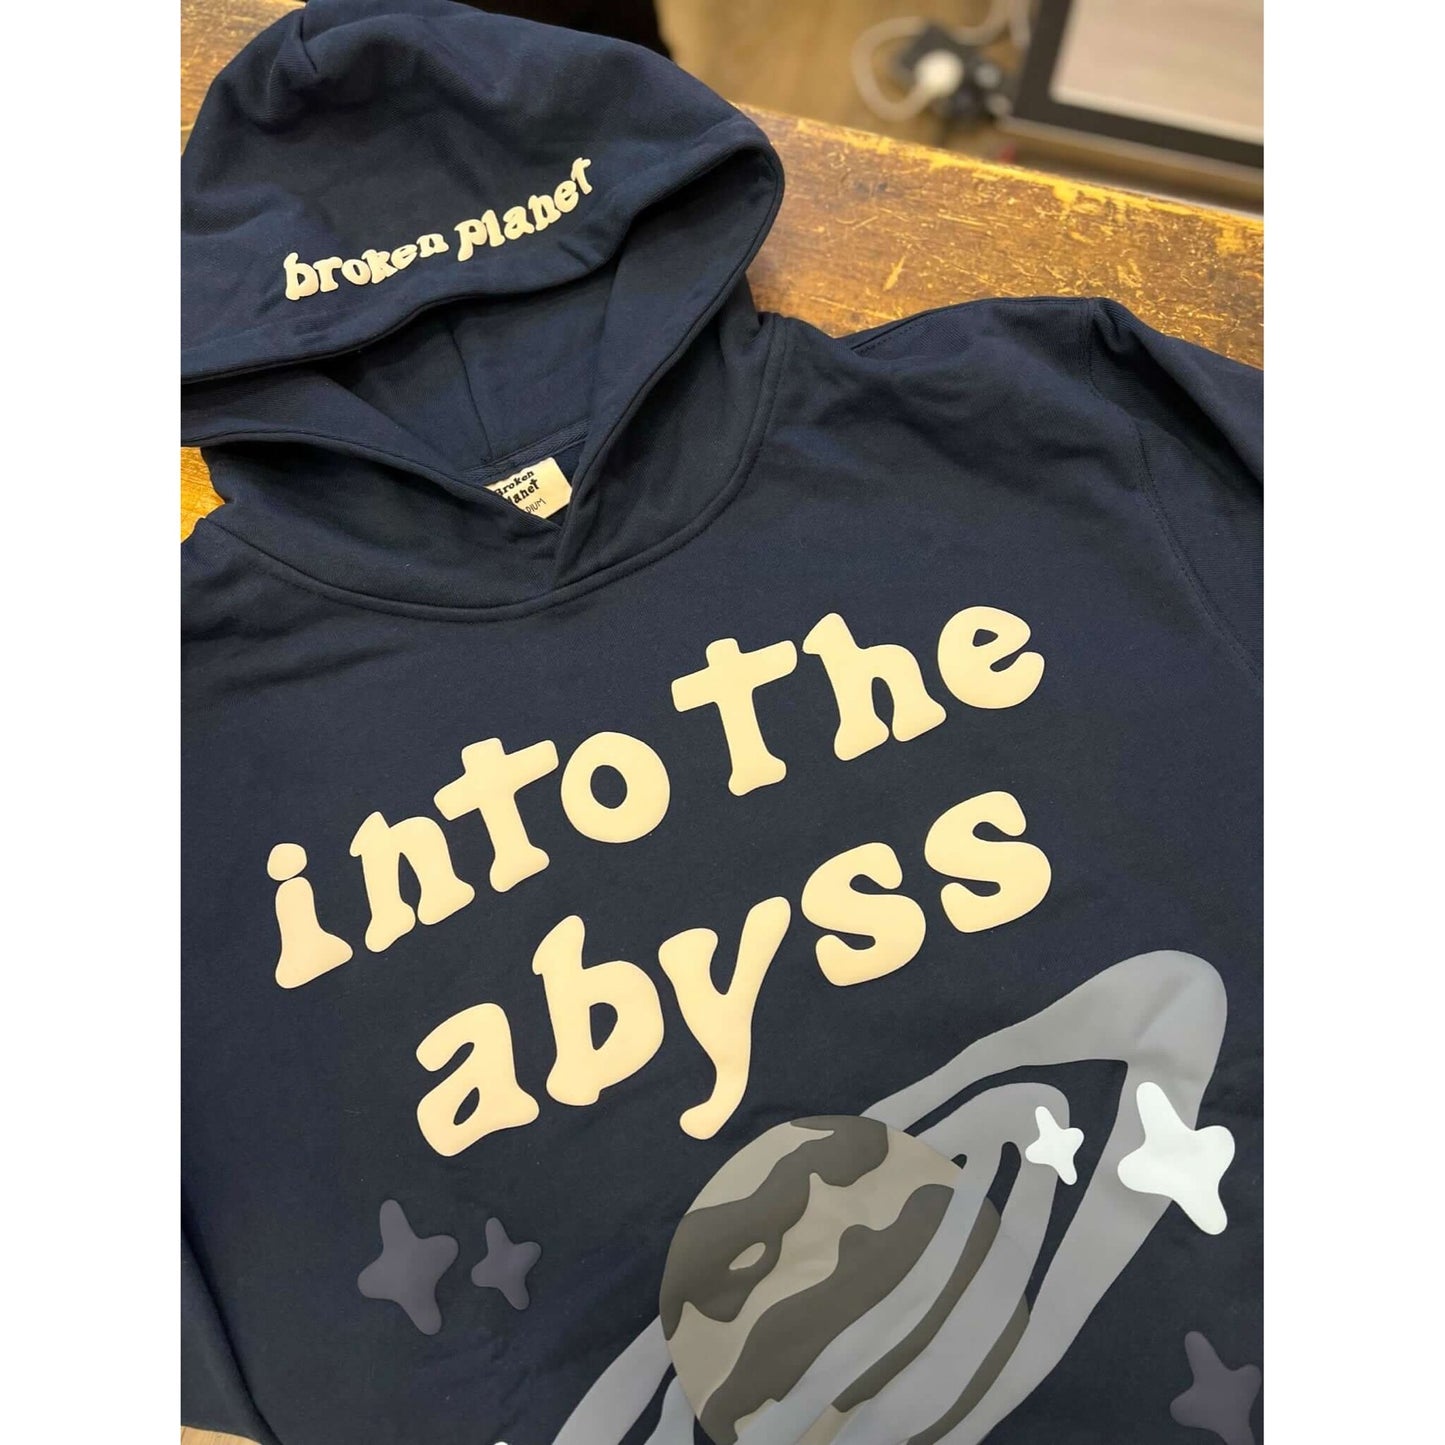 Broken Planet Market Into The Abyss Hoodie Outer Space Blue by Broken Planet Market from £149.00